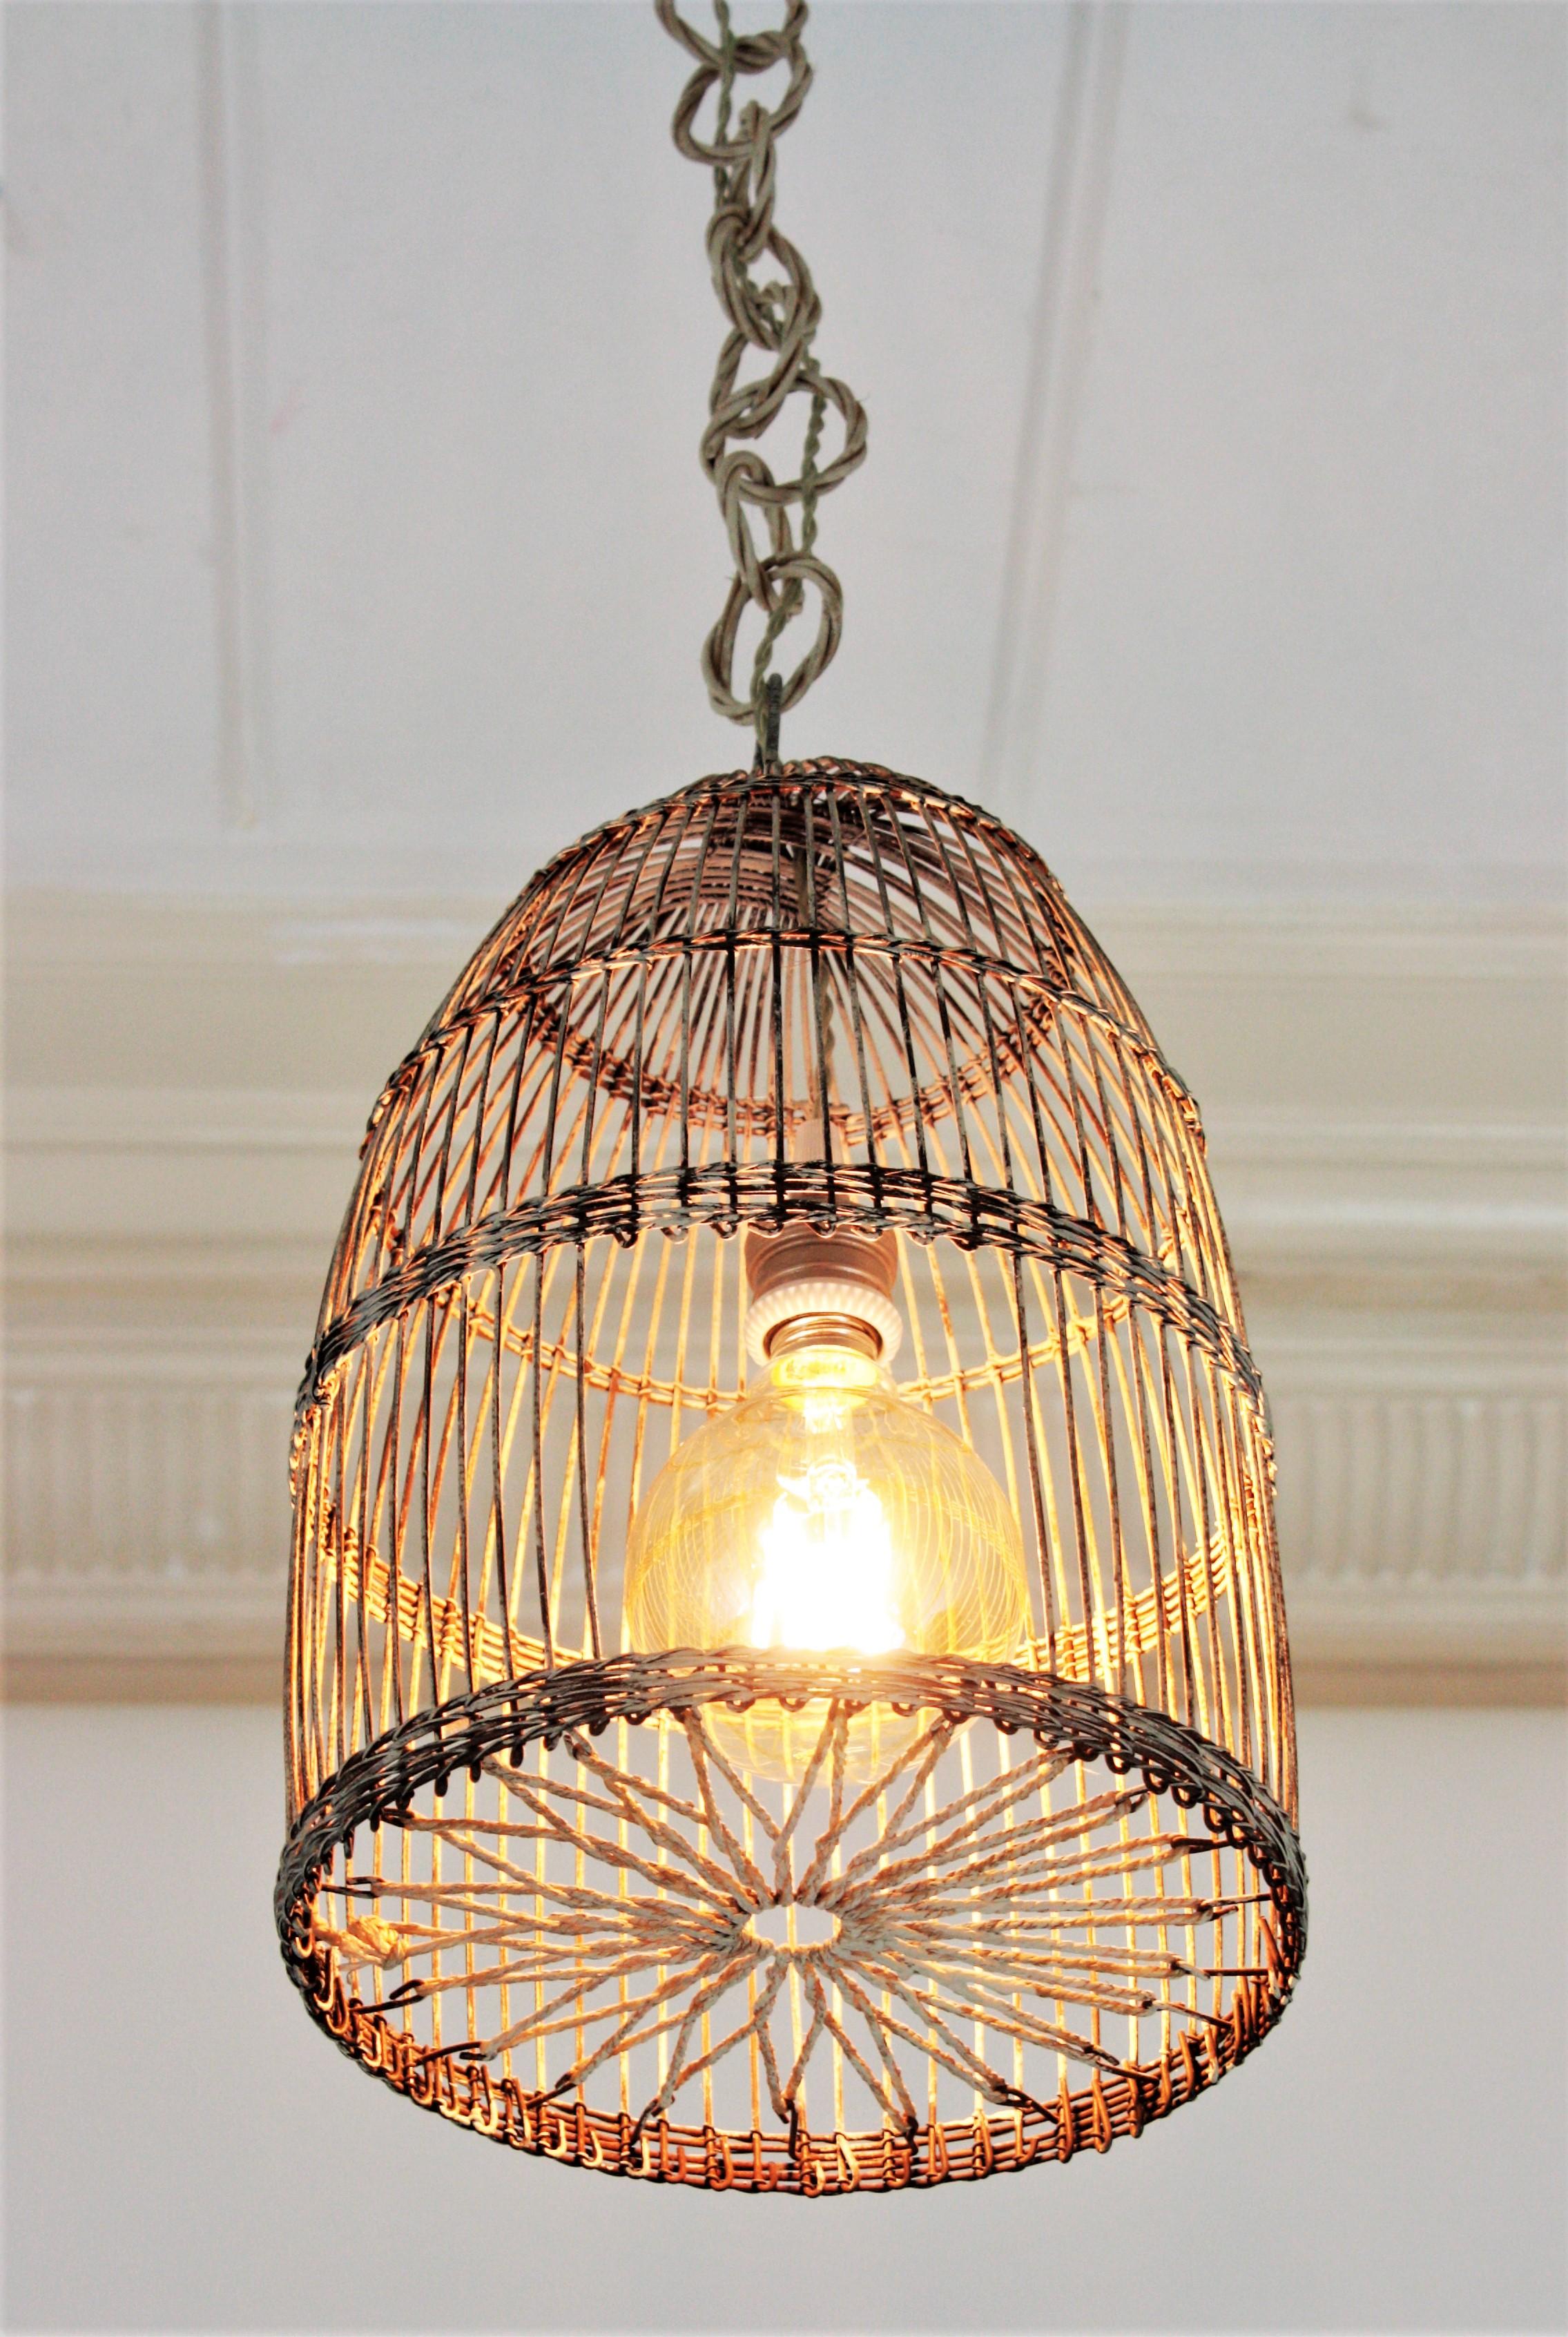 Lovely iron birdcage lantern or suspension lamp with wicker chain, France, 1940s-1950s.
Handcrafted iron birdcage with a star shaped rope detail at the bottom part and patinated details in white color. It hangs from a wicker / rattan chain that